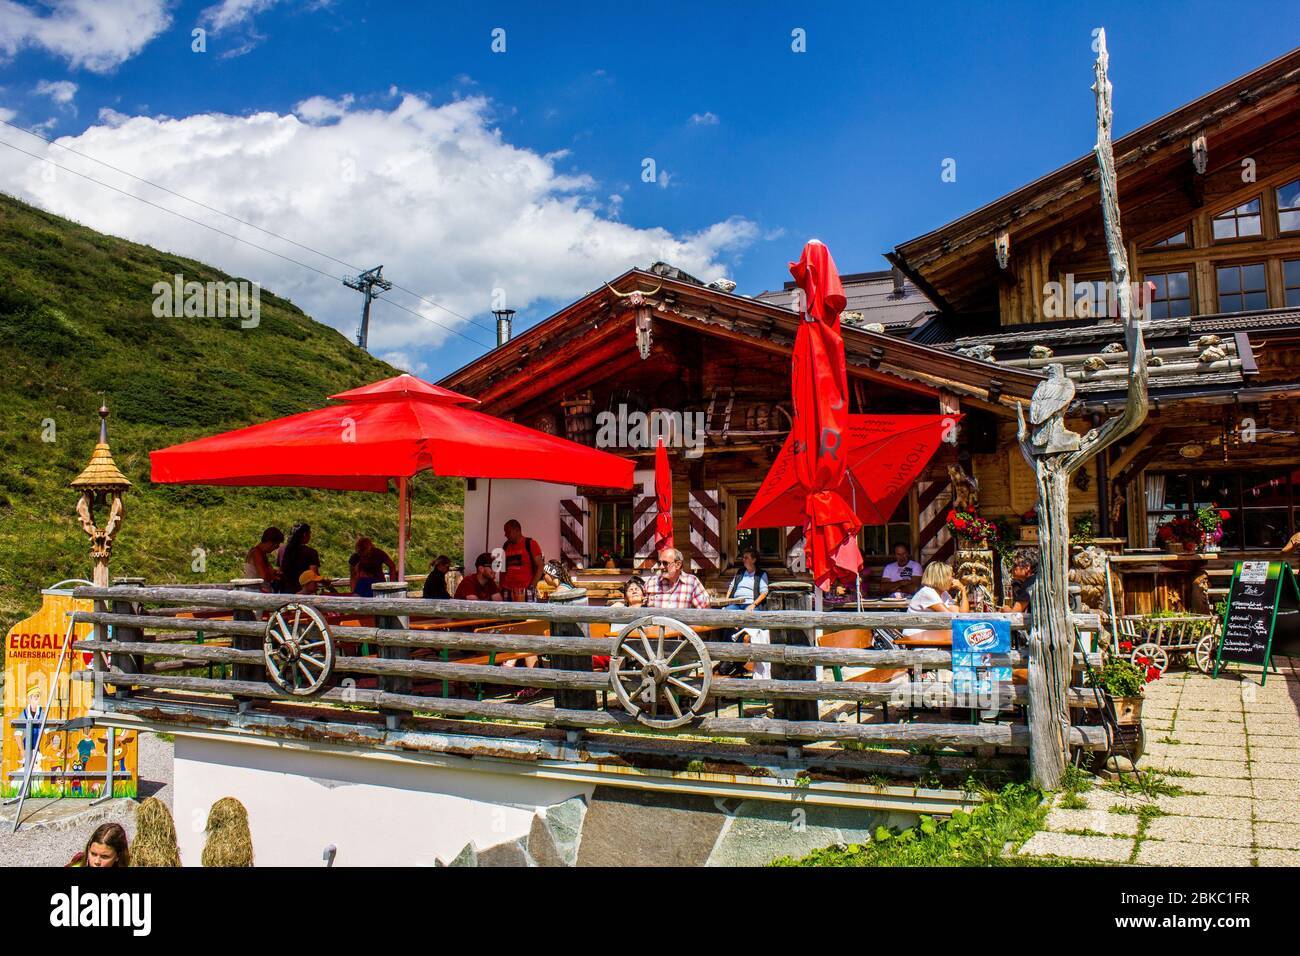 Tux, Austria - August 11, 2019: People Sitting in the Garden of Berggasthaus Eggalm, Tyrol Stock Photo